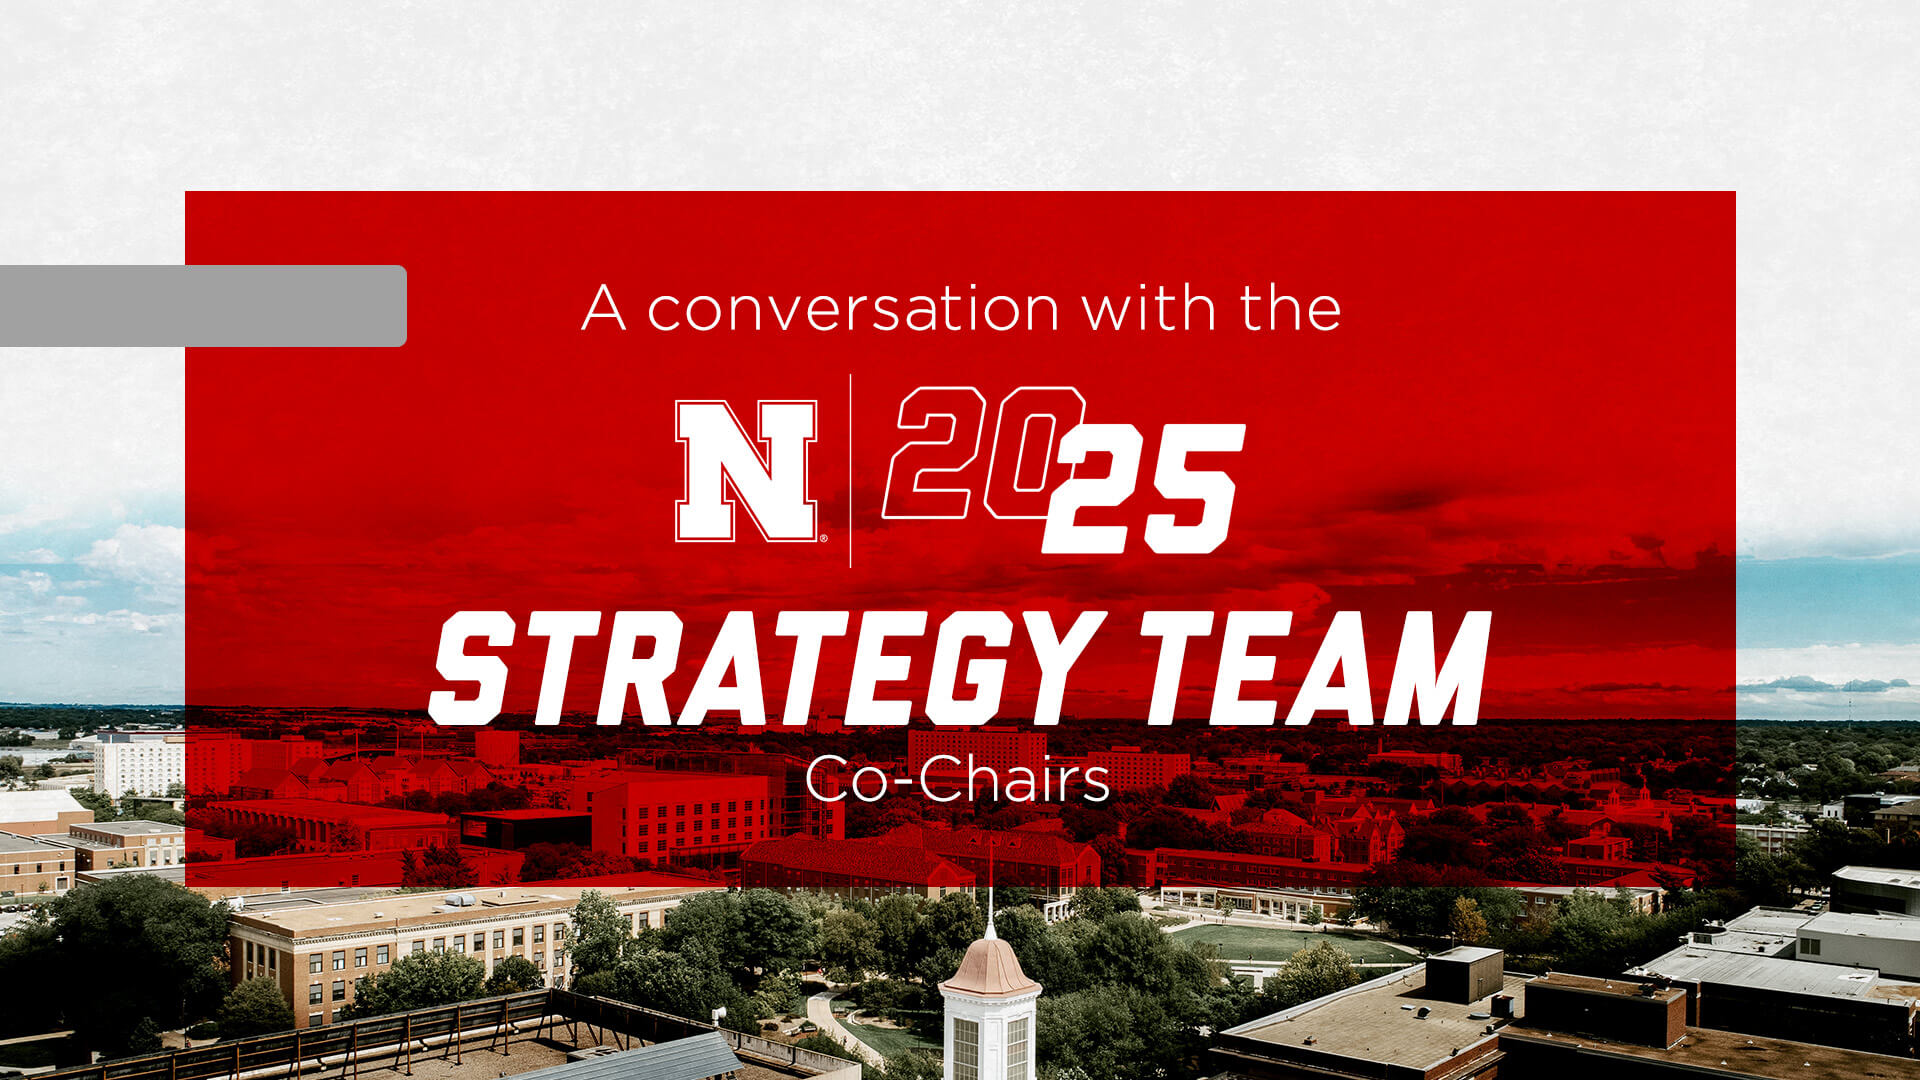 A Conversation with the N|2025 Strategy Team Co-Chairs